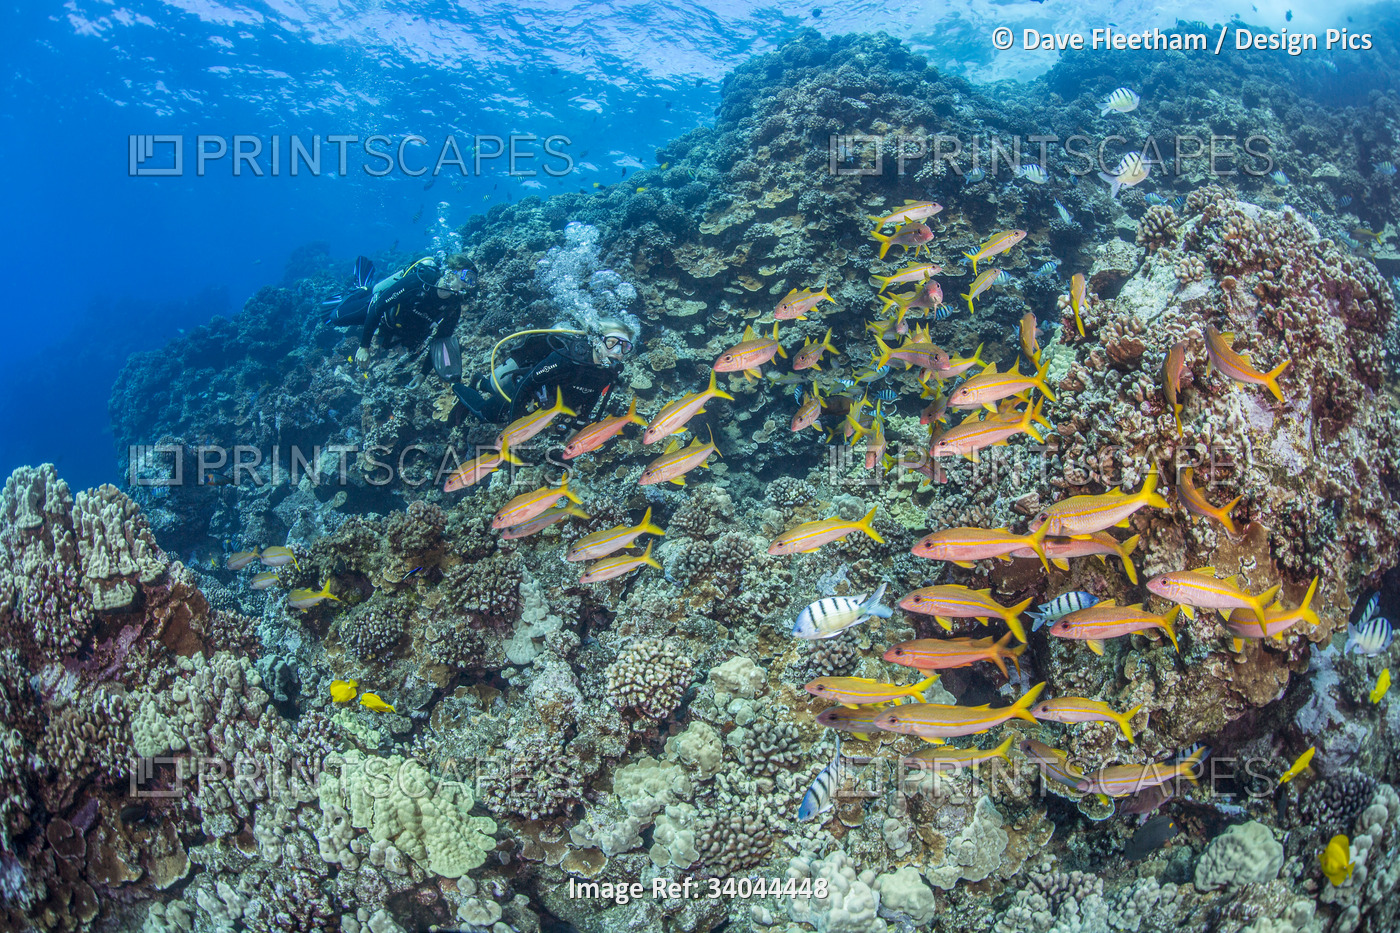 Divers pictured with Yellowfin goatfish (Mulloidichthys vanicolensis) over a ...